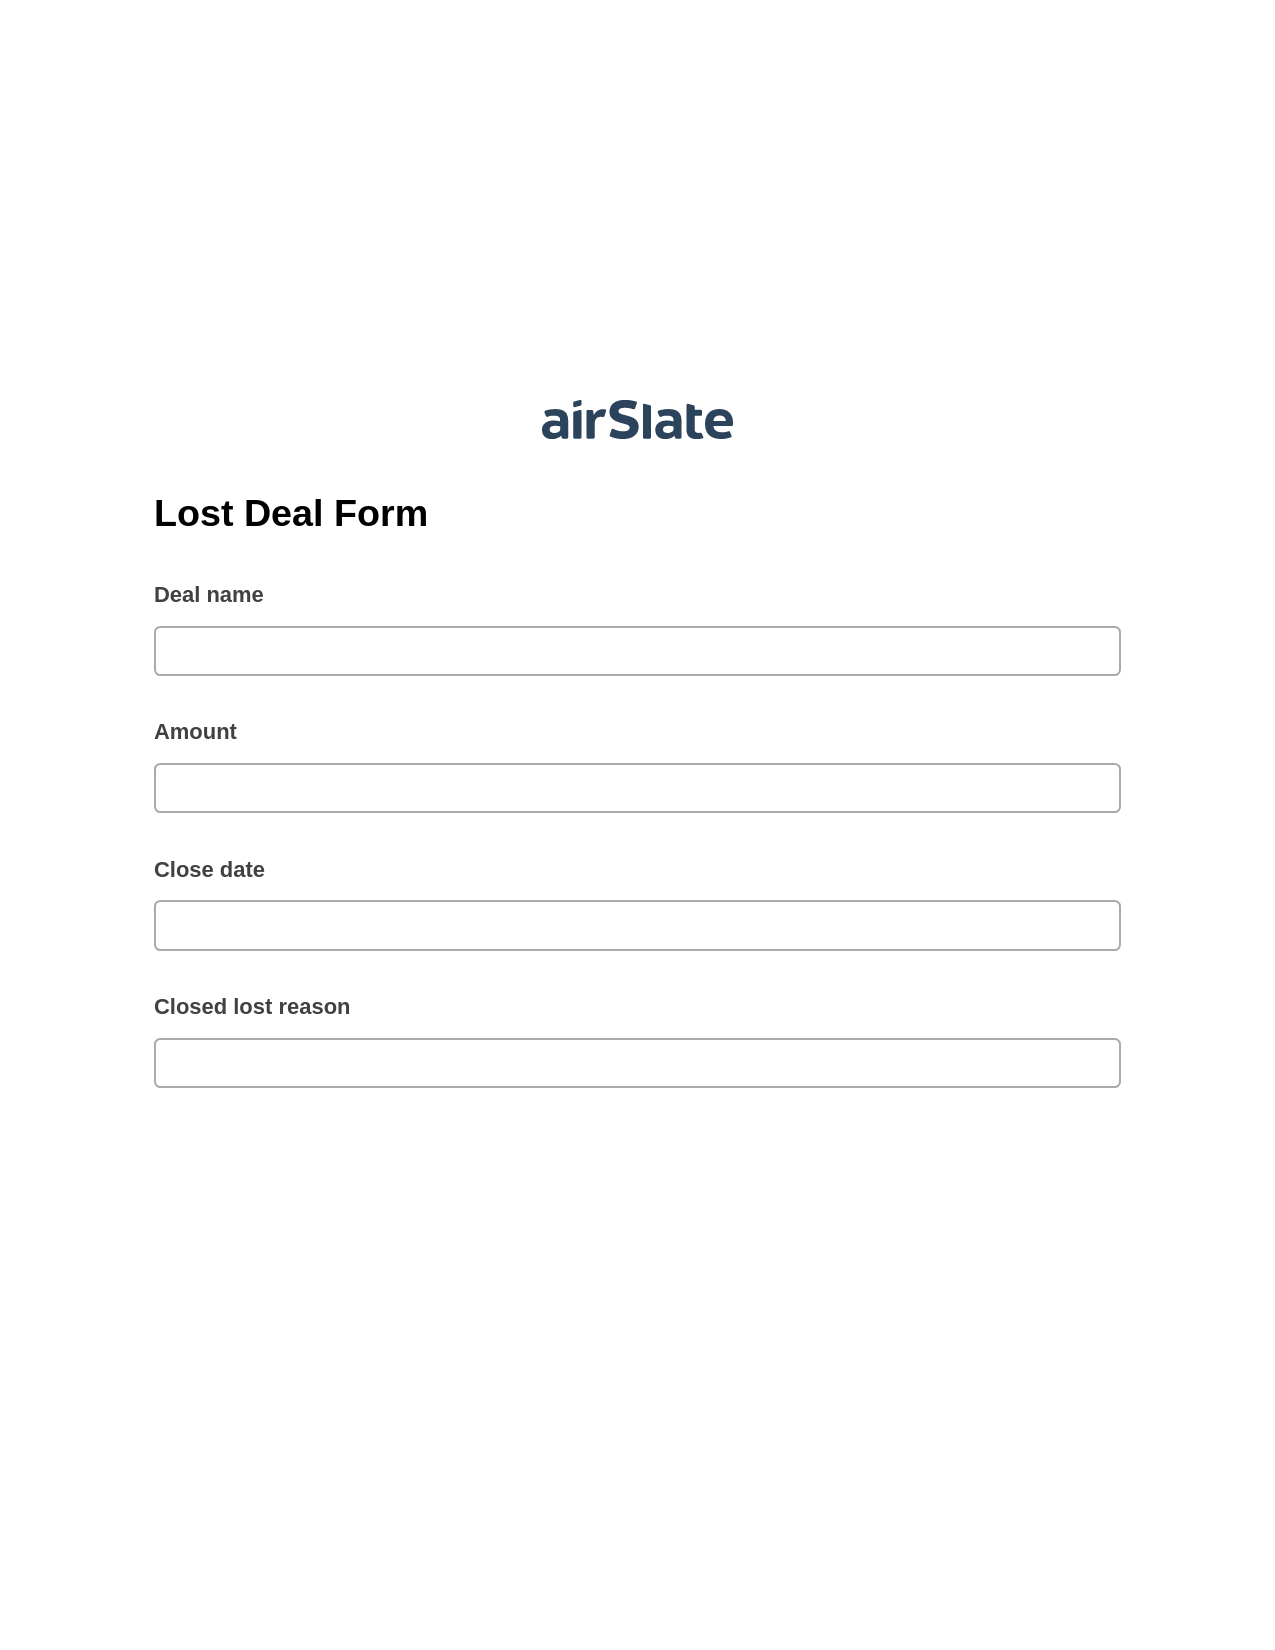 Lost Deal Form Pre-fill from Google Sheets Bot, Webhook Bot, Archive to Dropbox Bot